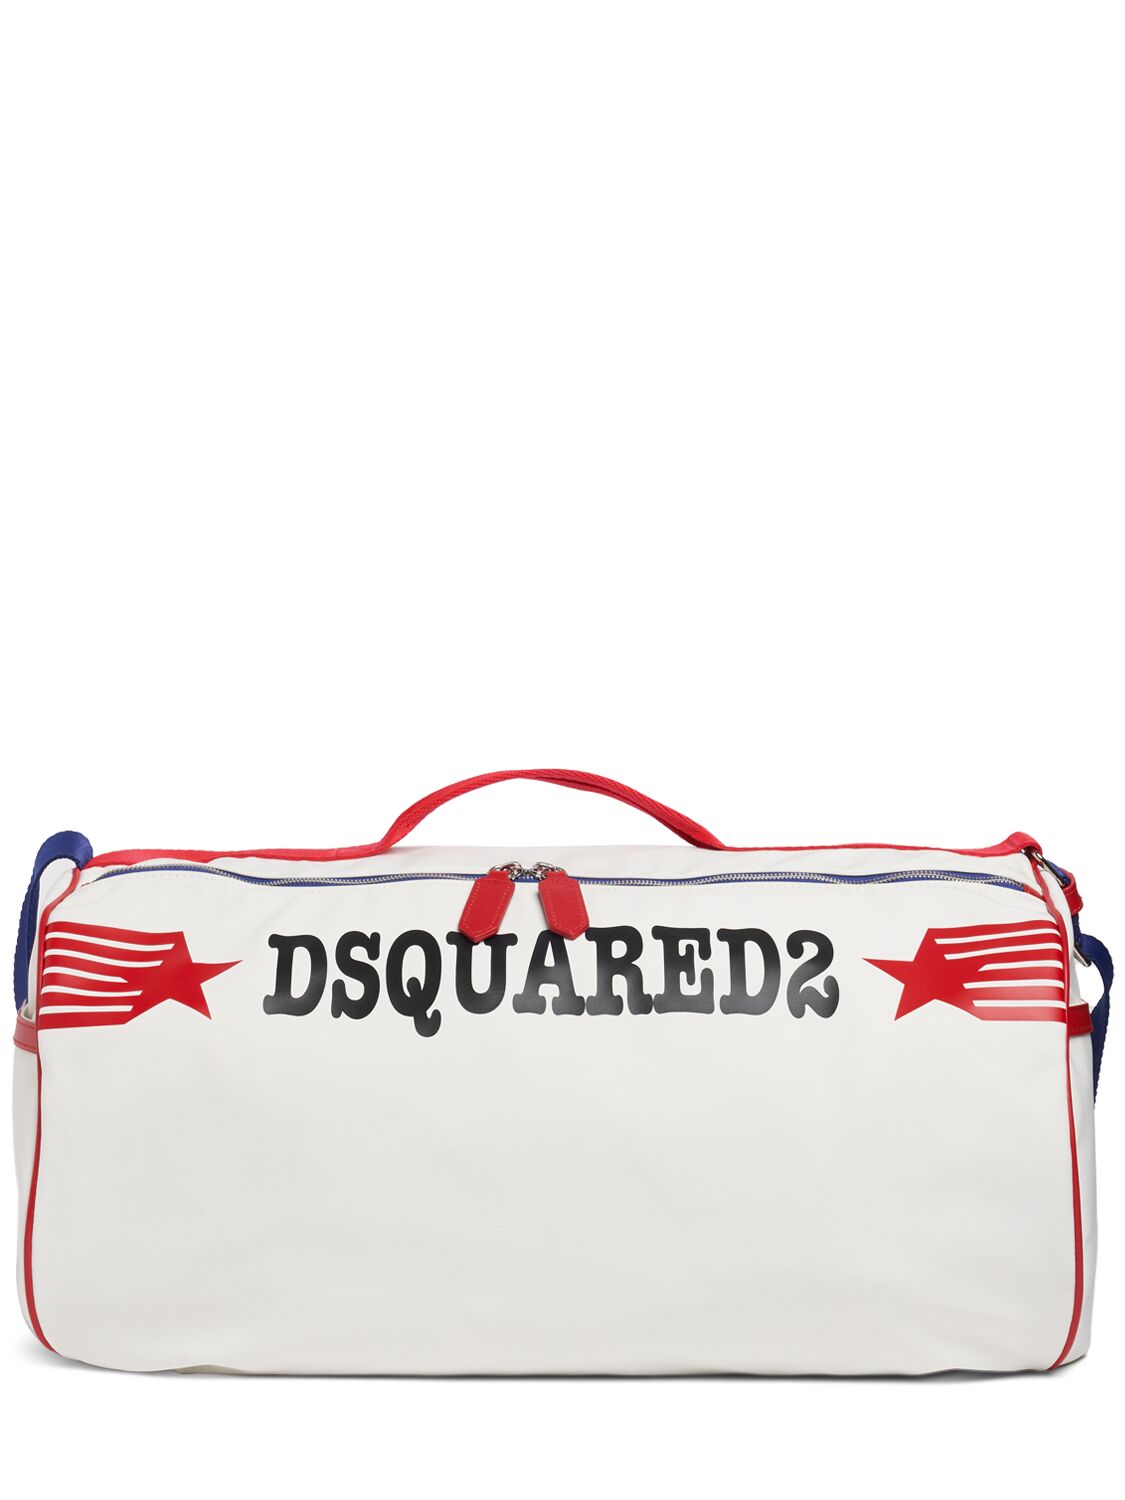 Rocco Dsquared2 Duffle Bag